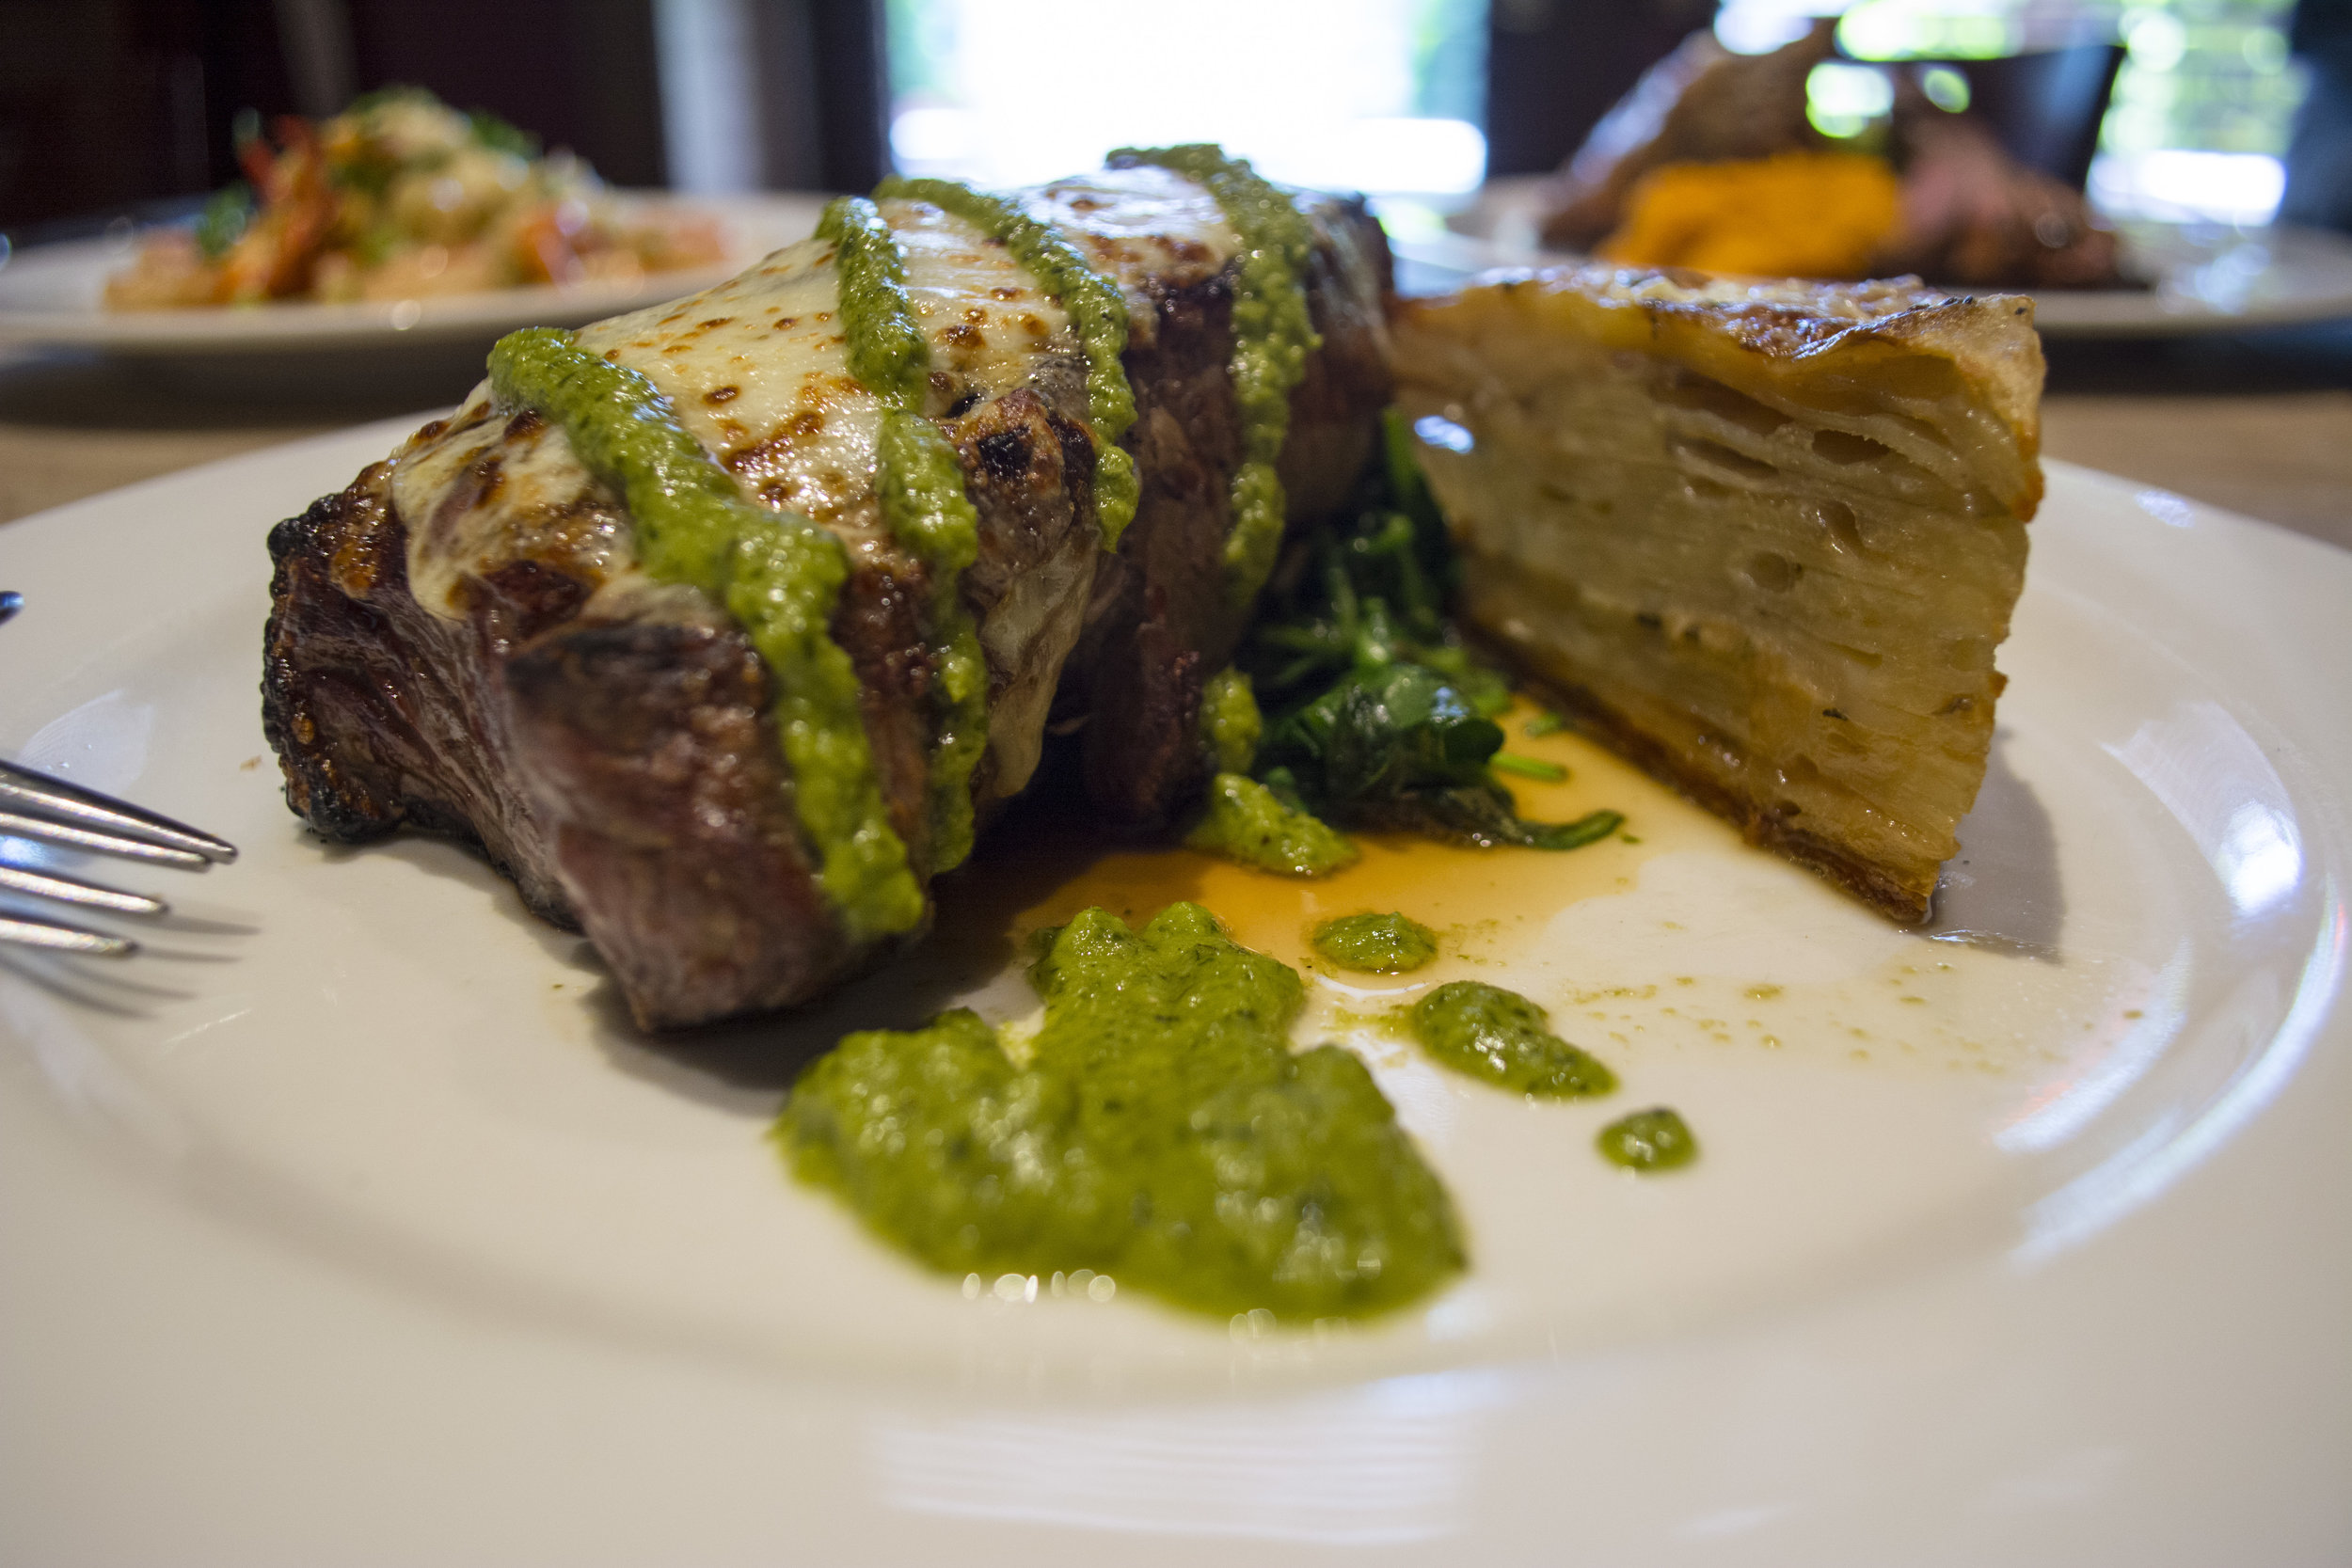   The classic Dry Aged NY Strip steak at Mac’s Steakhouse.&nbsp;  Long Islander News Photo/File  